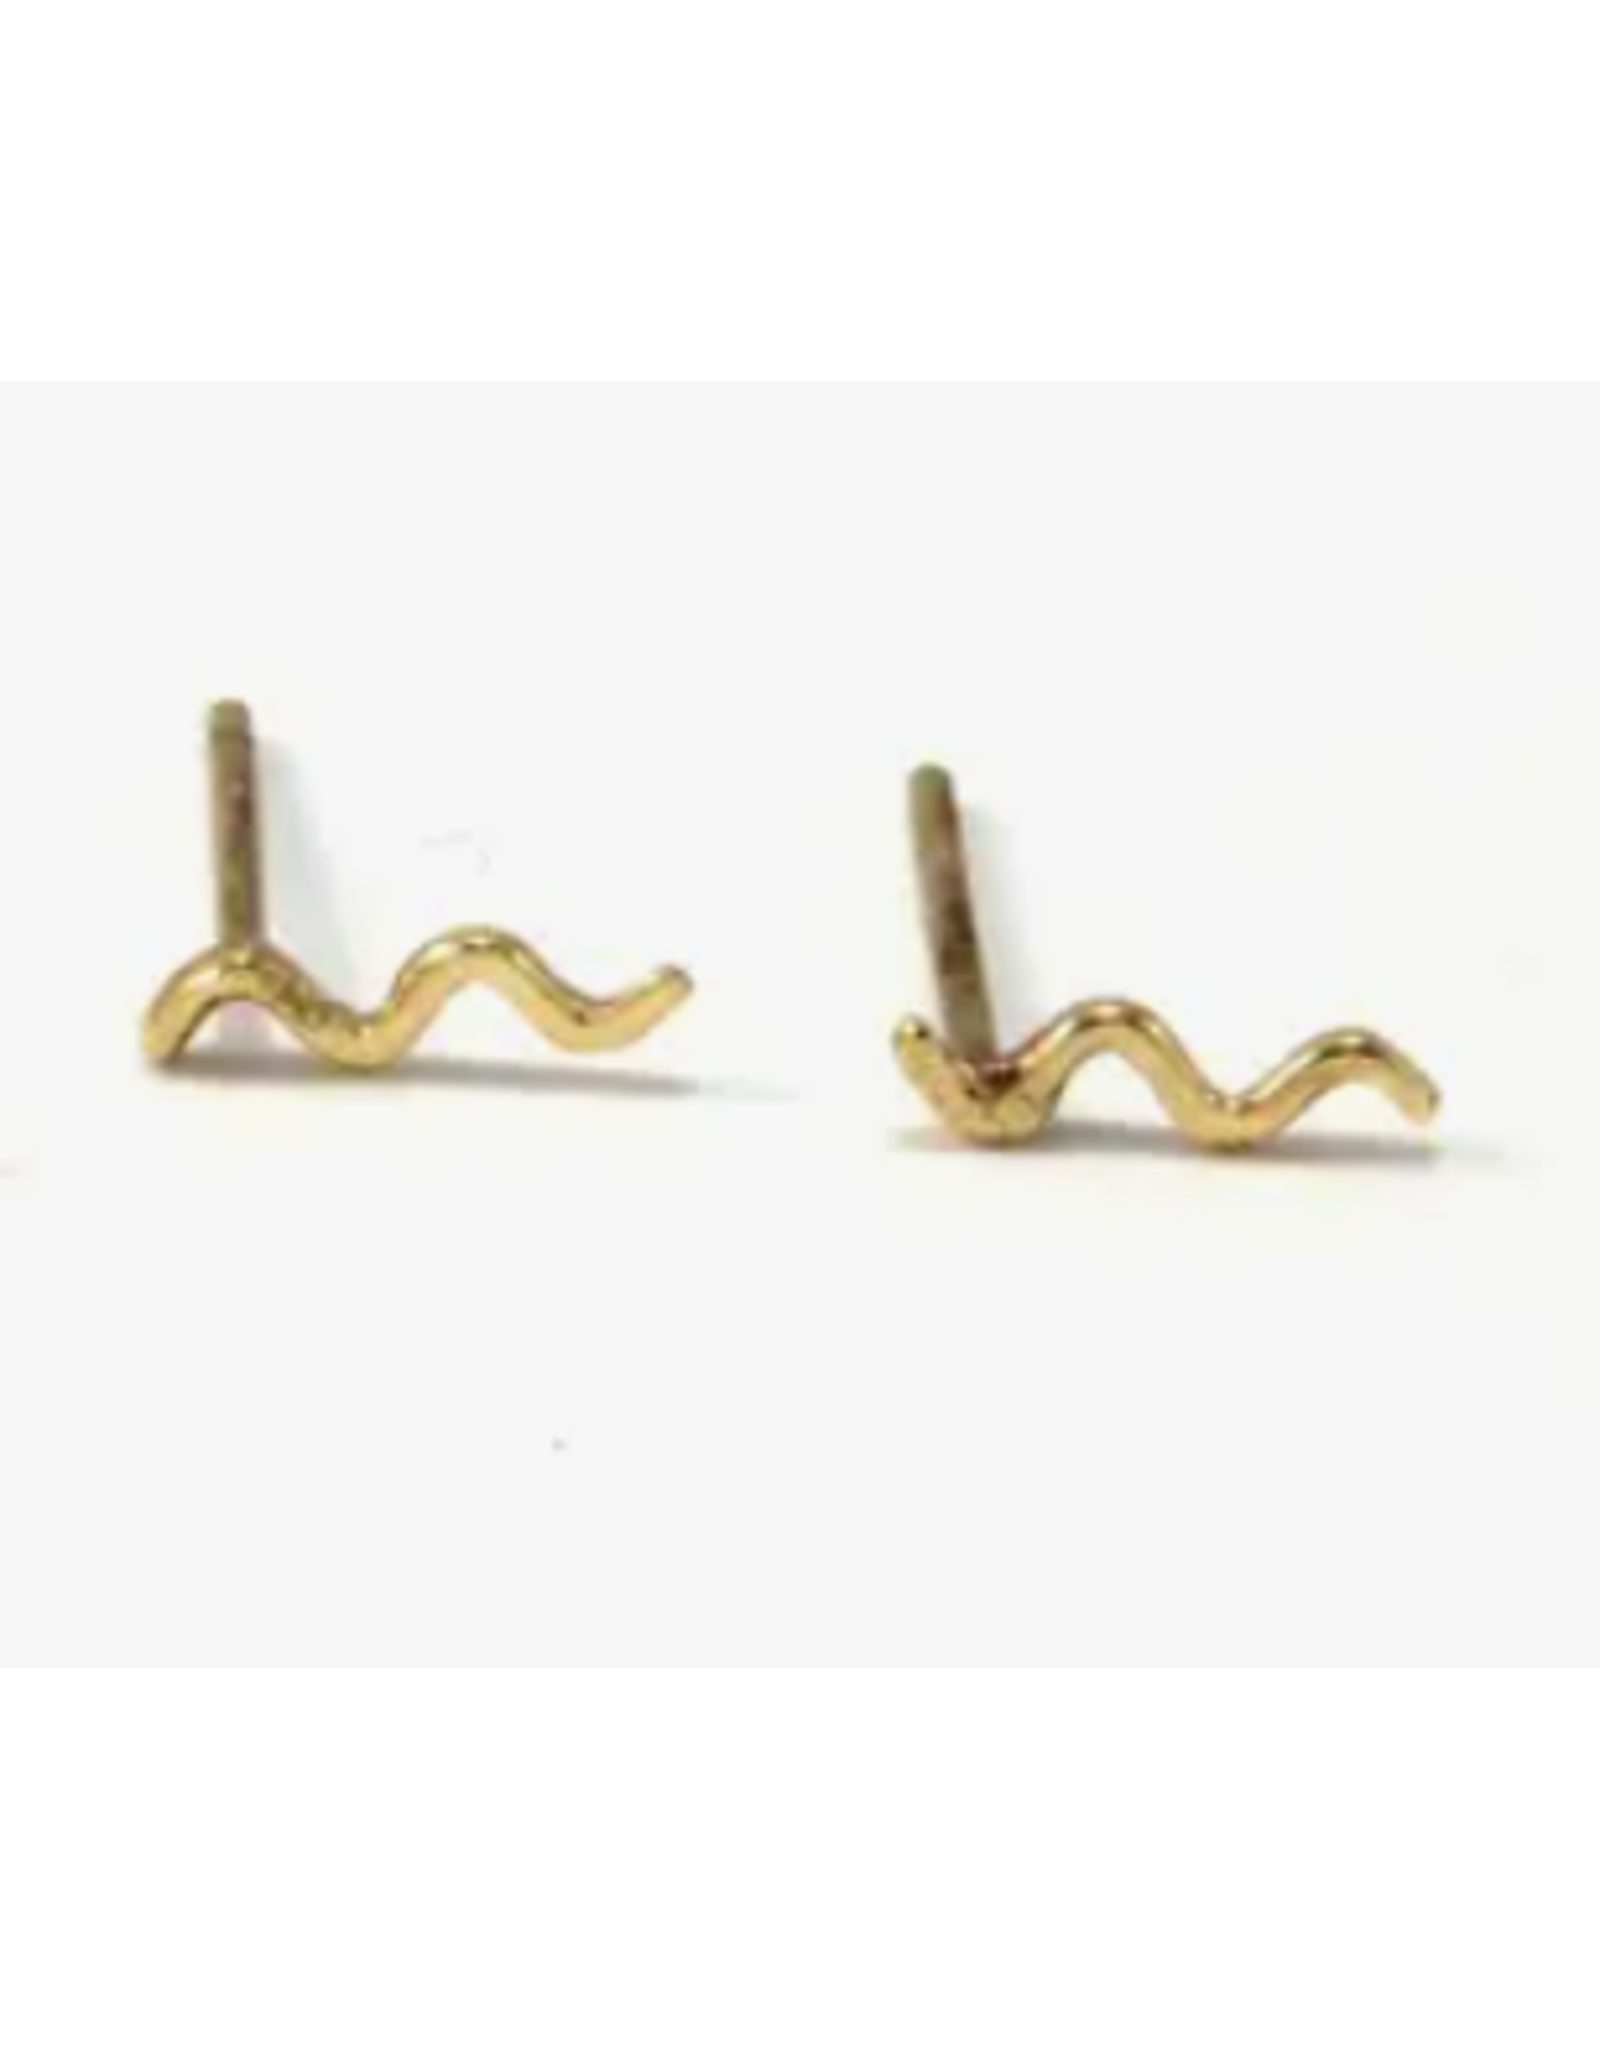 India Squiggle Stud Earrings - Brass, India